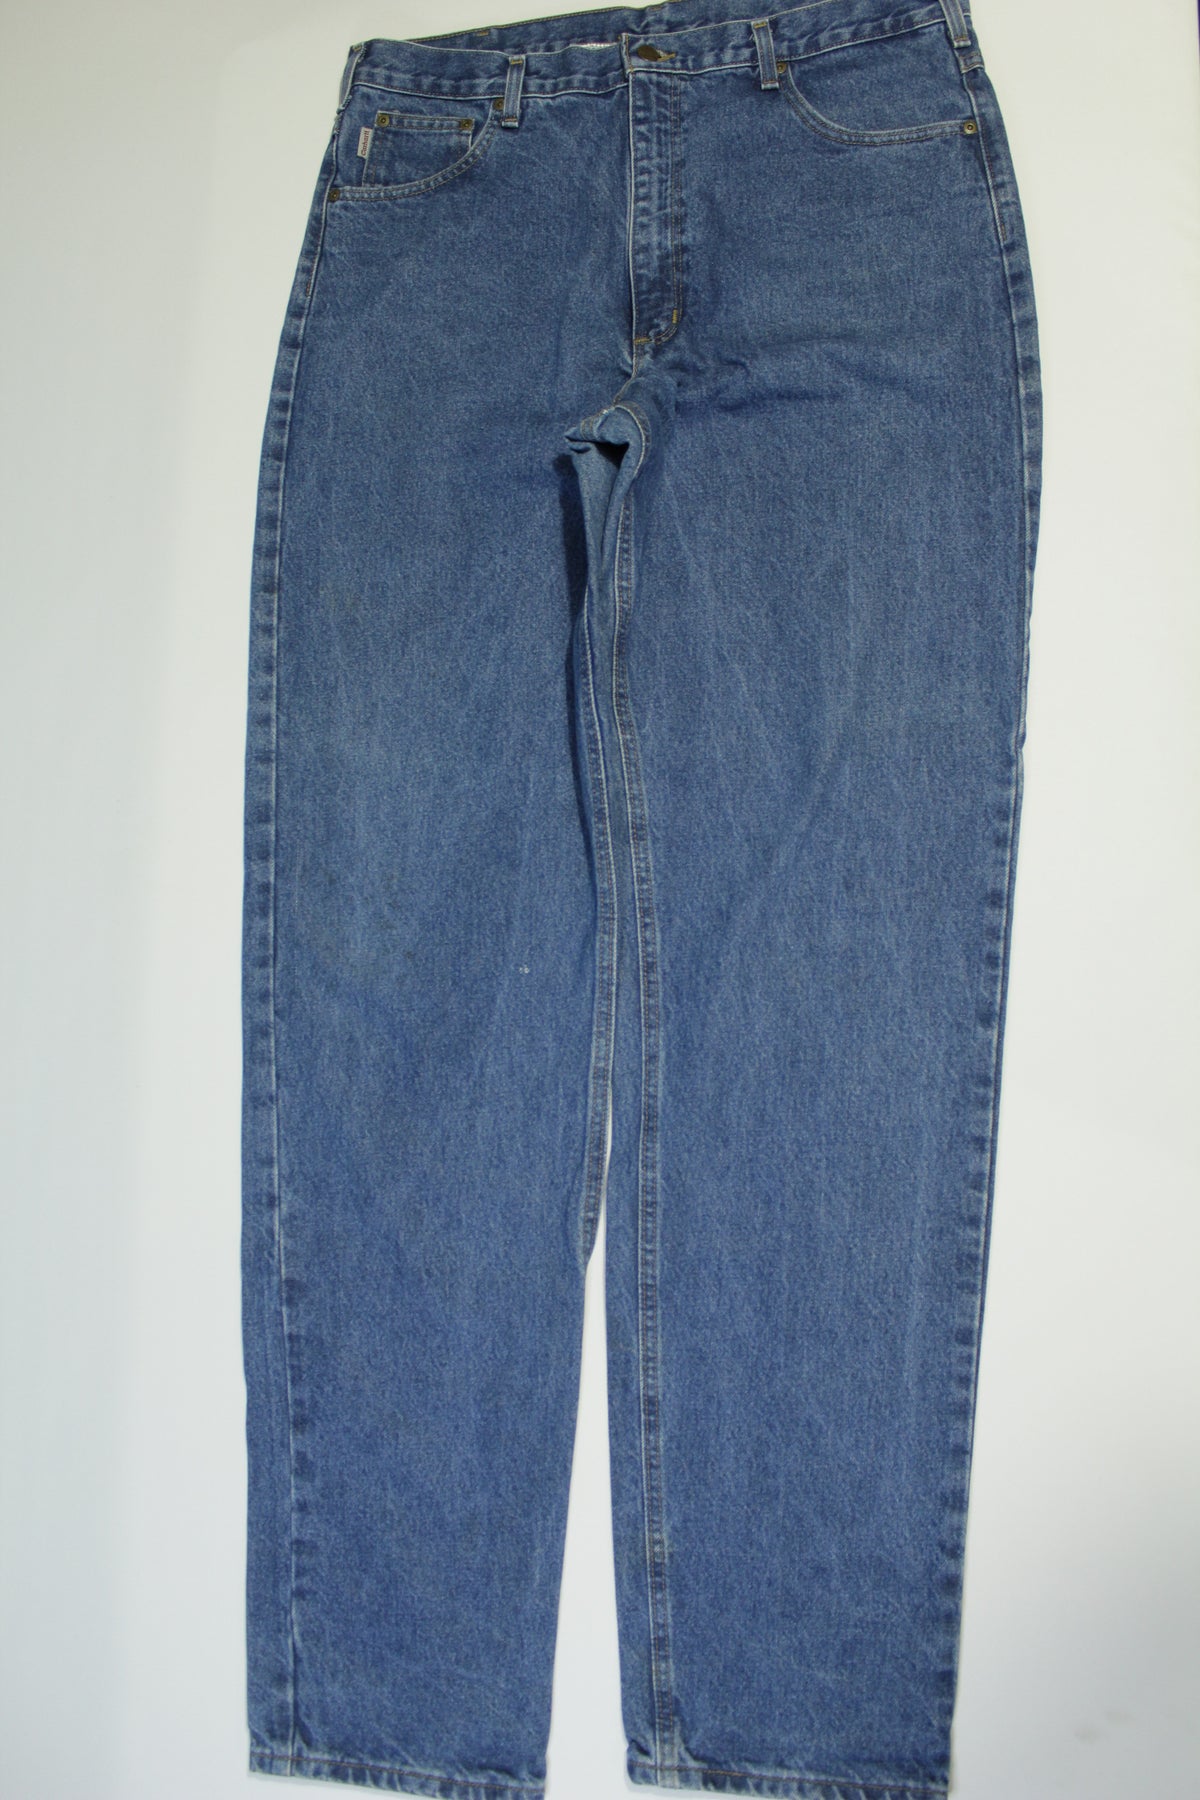 Carhartt B17 Utility Work Relaxed Fit Denim Construction Jeans